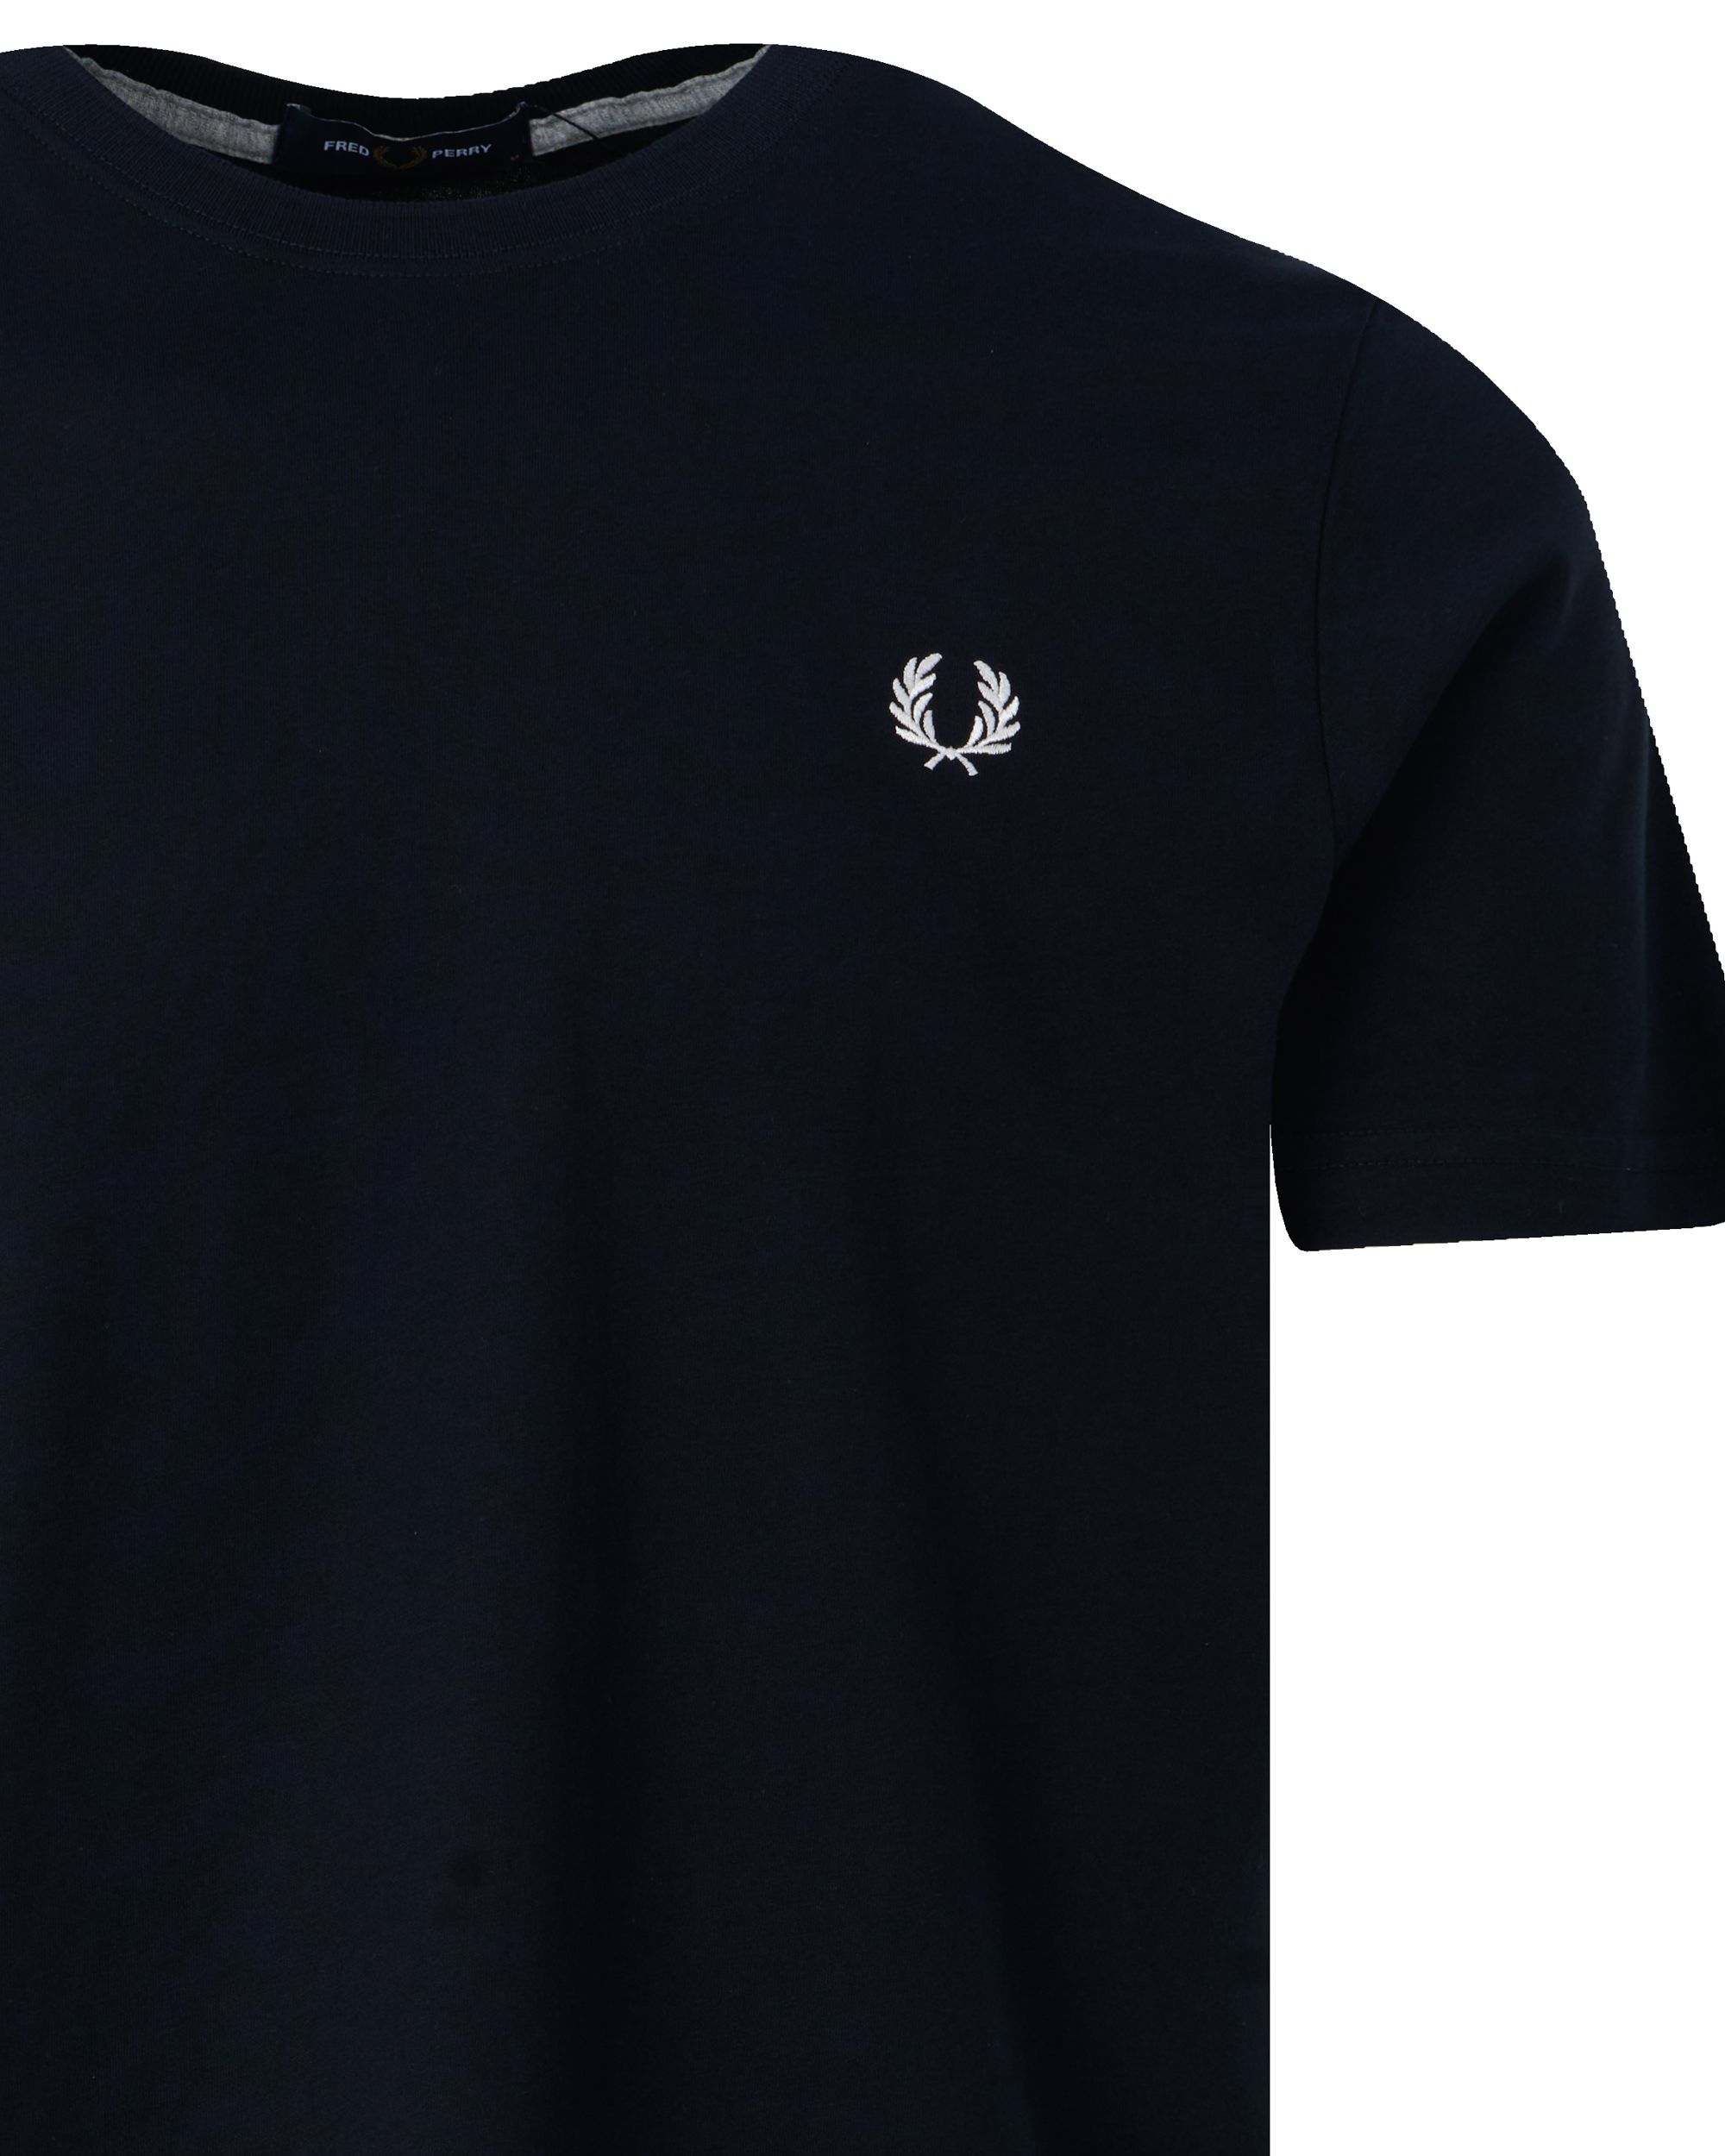 Fred Perry T-shirt KM Donker blauw 095664-001-L